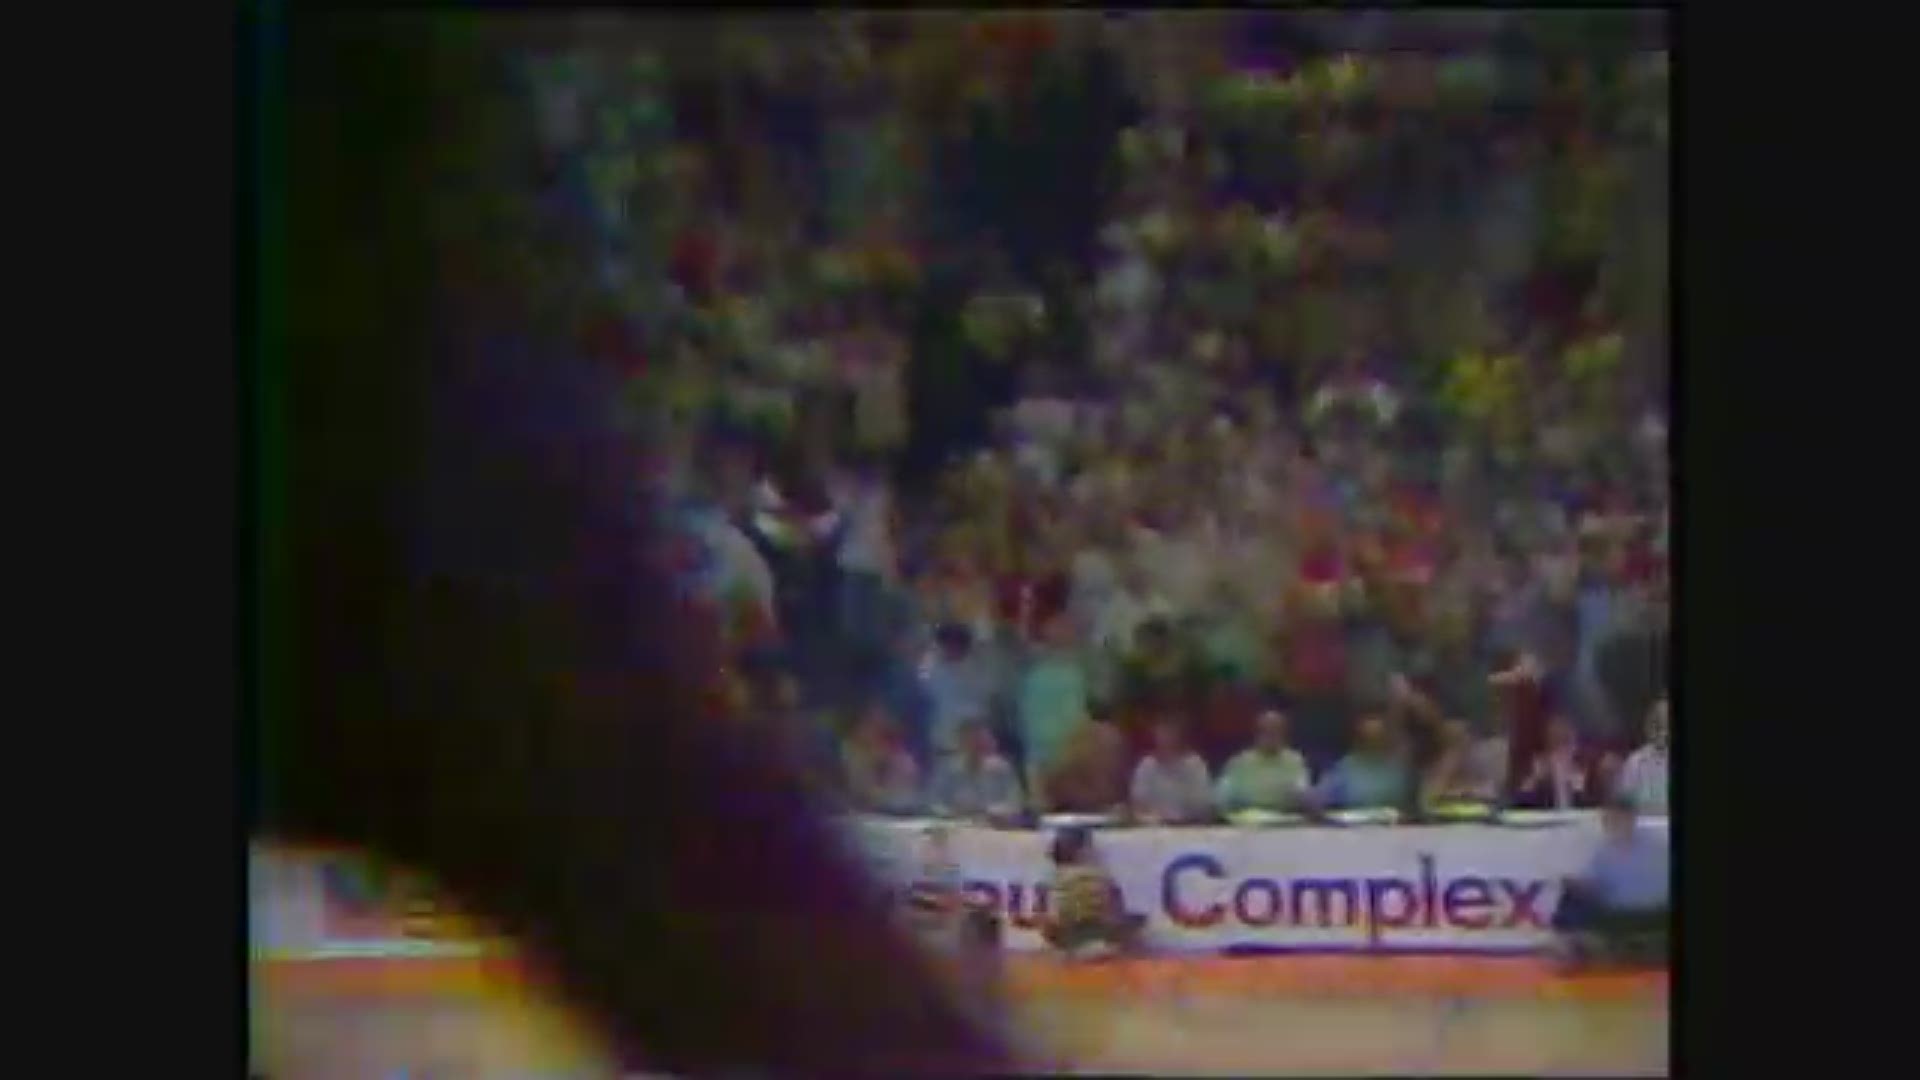 1977 KGW archive video shows the moment the Portland Trail Blazers beat the Philadelphia 76ers to win the NBA Championship. This raw video also shows coach Jack Ramsay's post-game speech and the presentation of the trophy to him and Bill Walton.